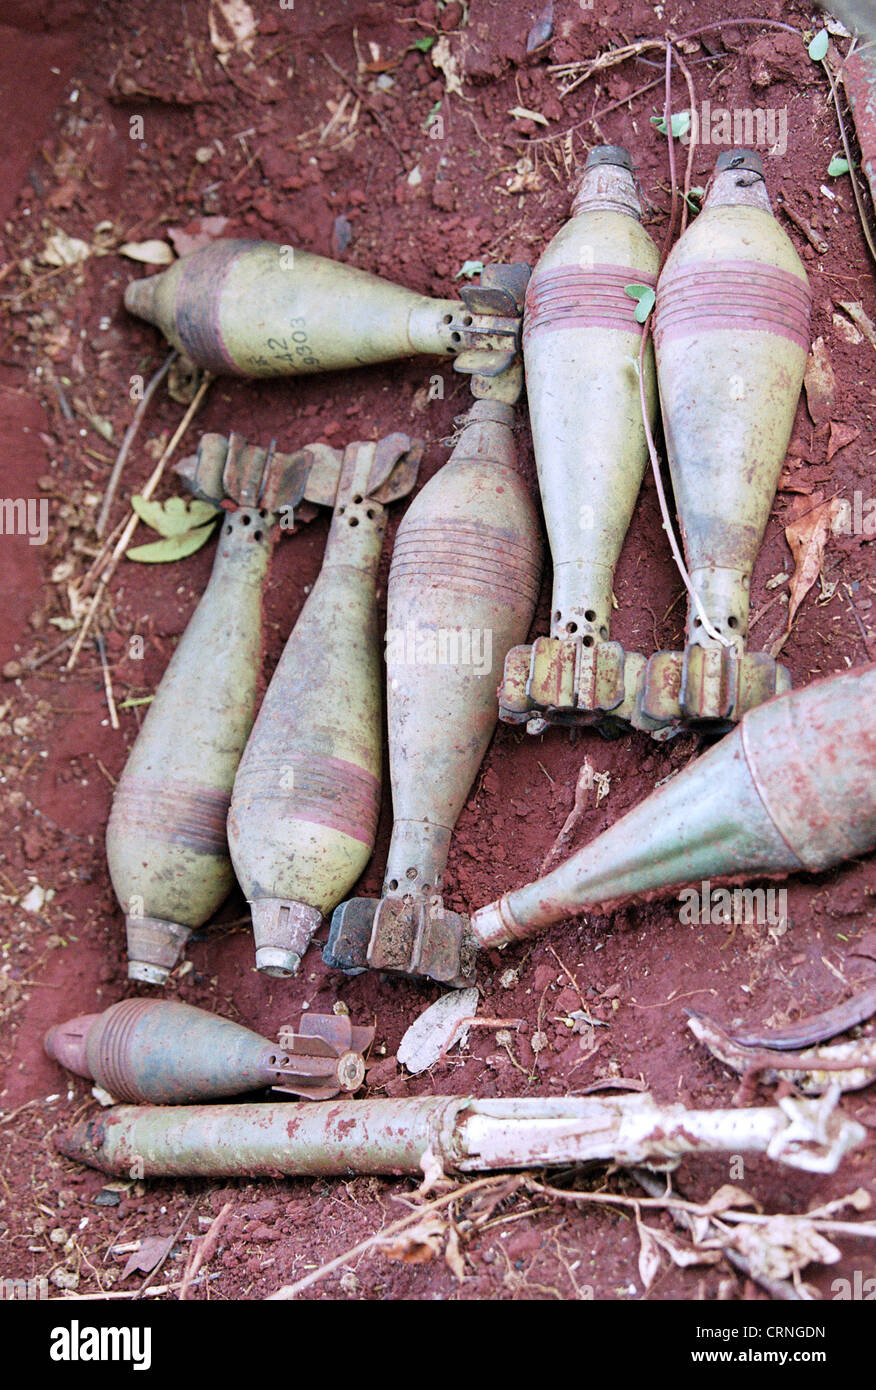 Collected war scrap and ammunition in Angola. Stock Photo